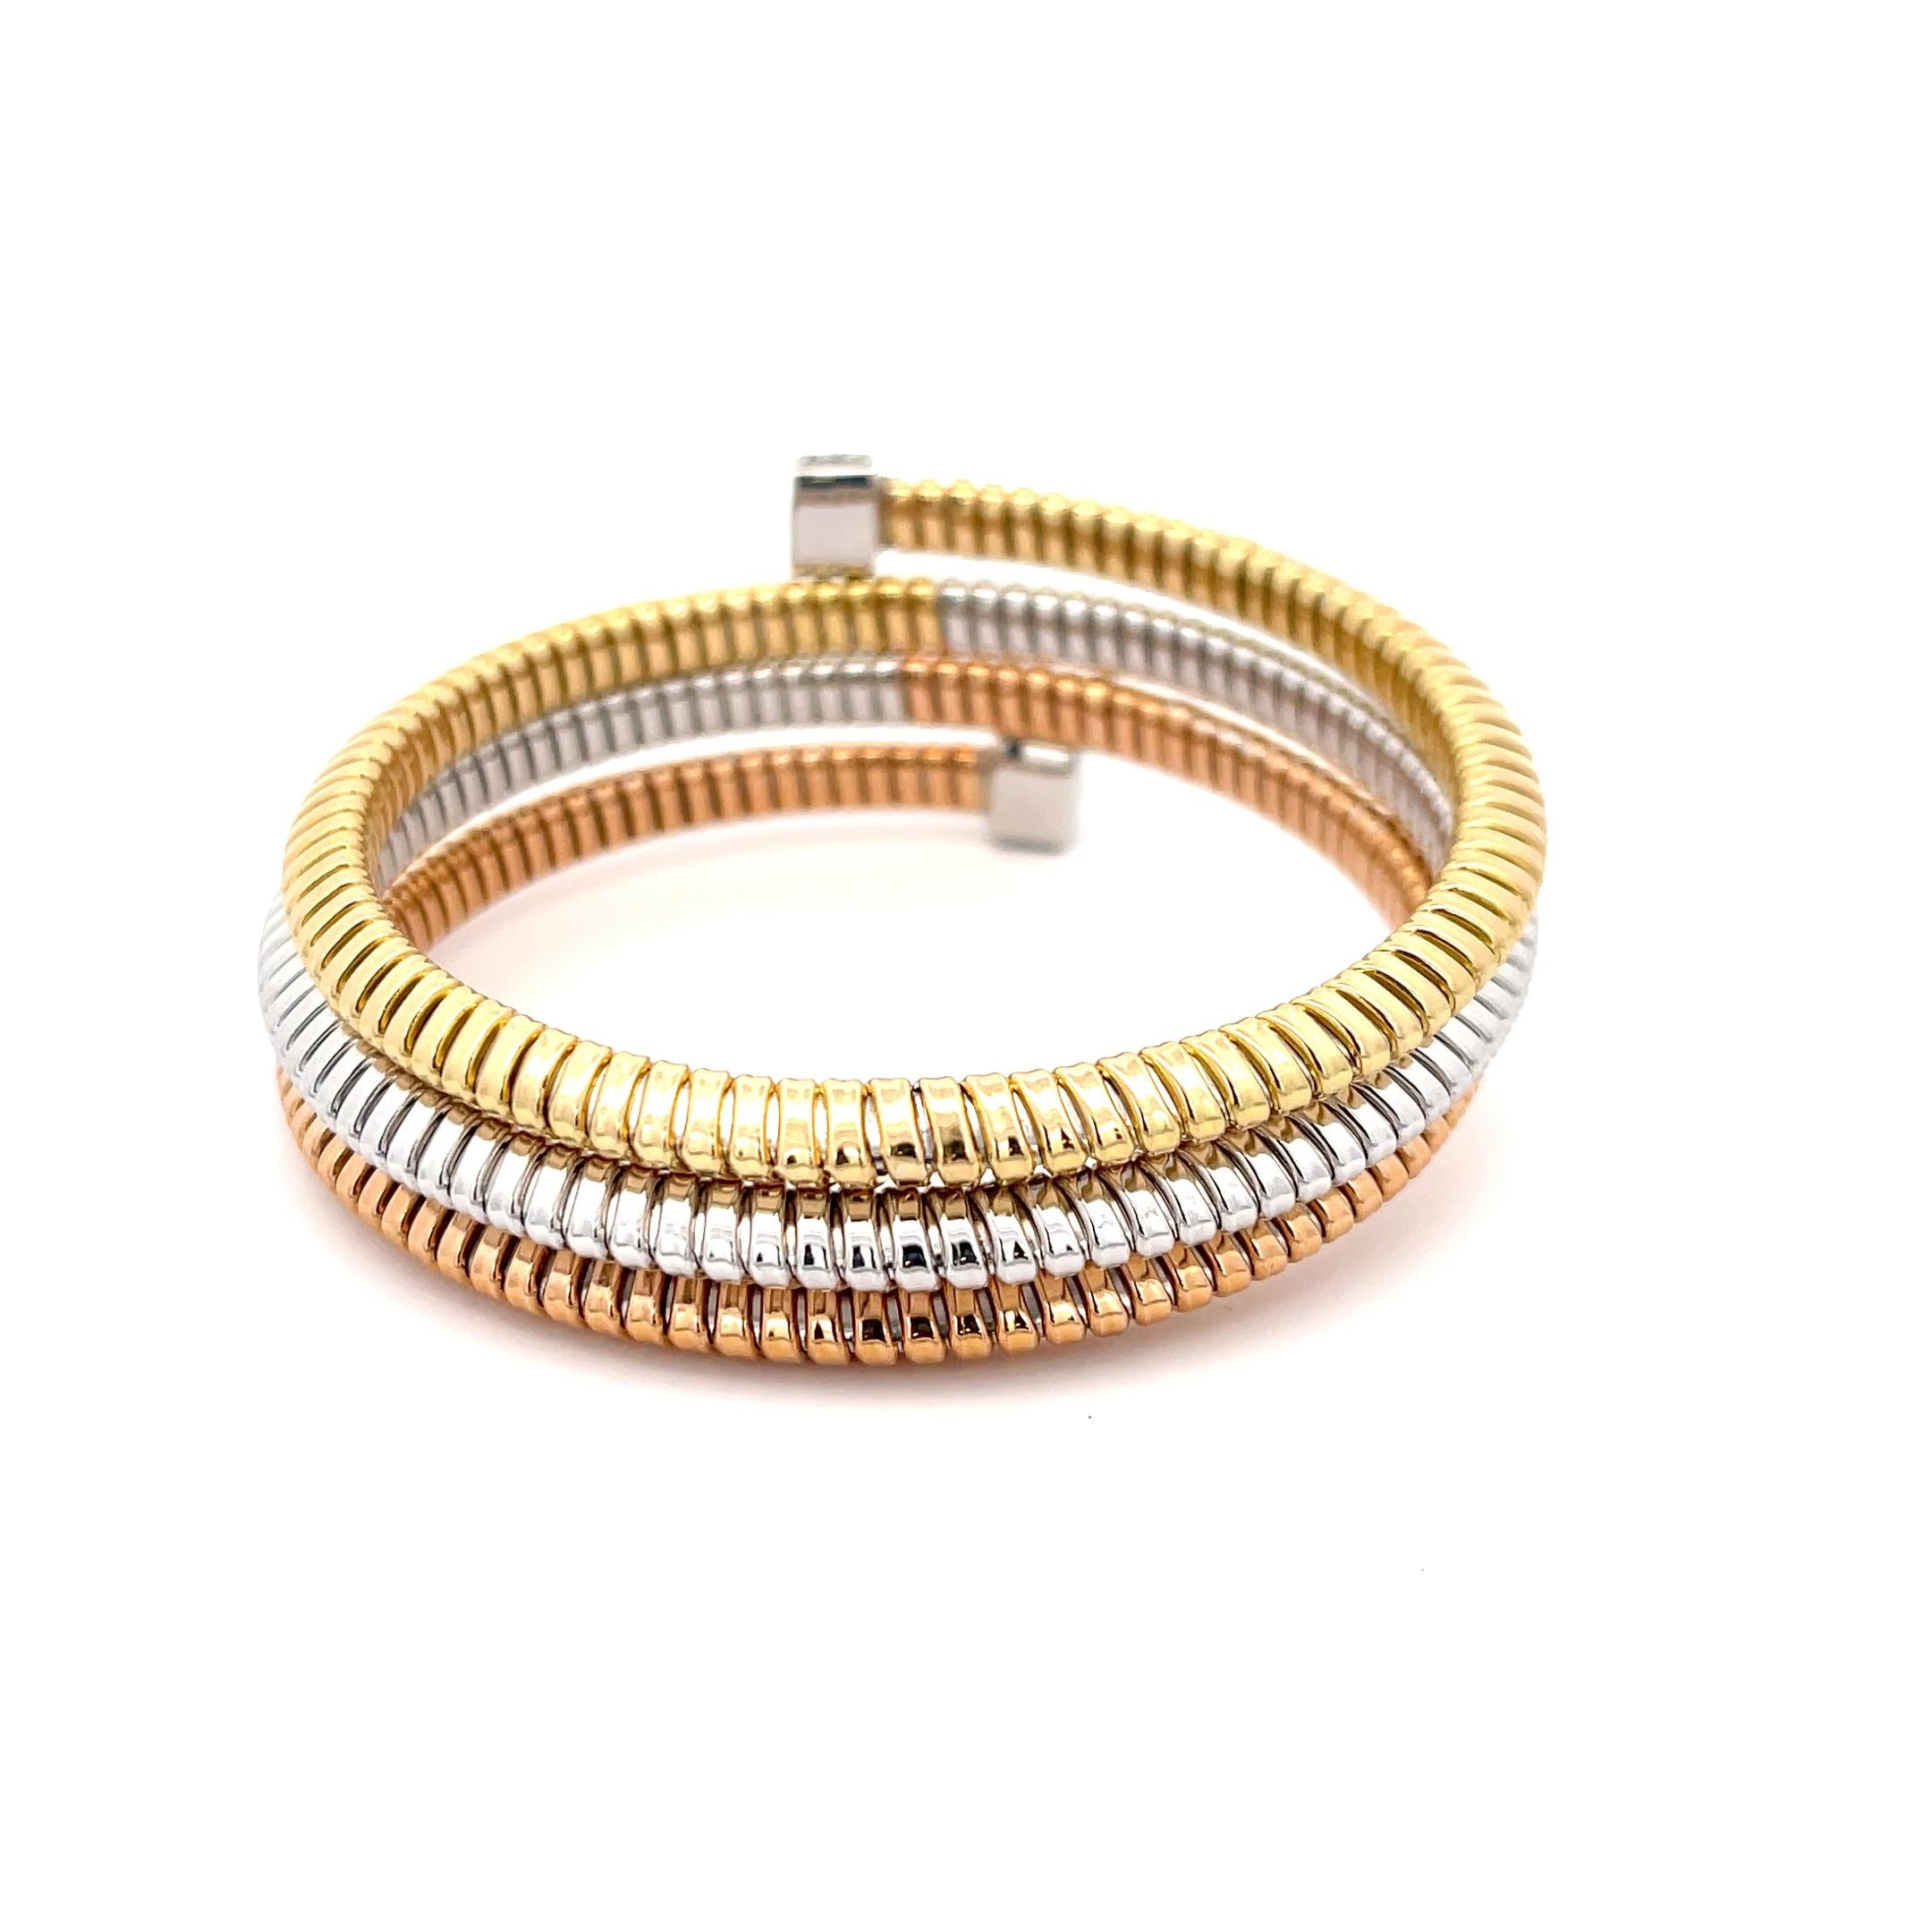 Tessitore Tri-Gold Cable Wrap Bracelet in 18K Gold In Excellent Condition For Sale In Dallas, TX